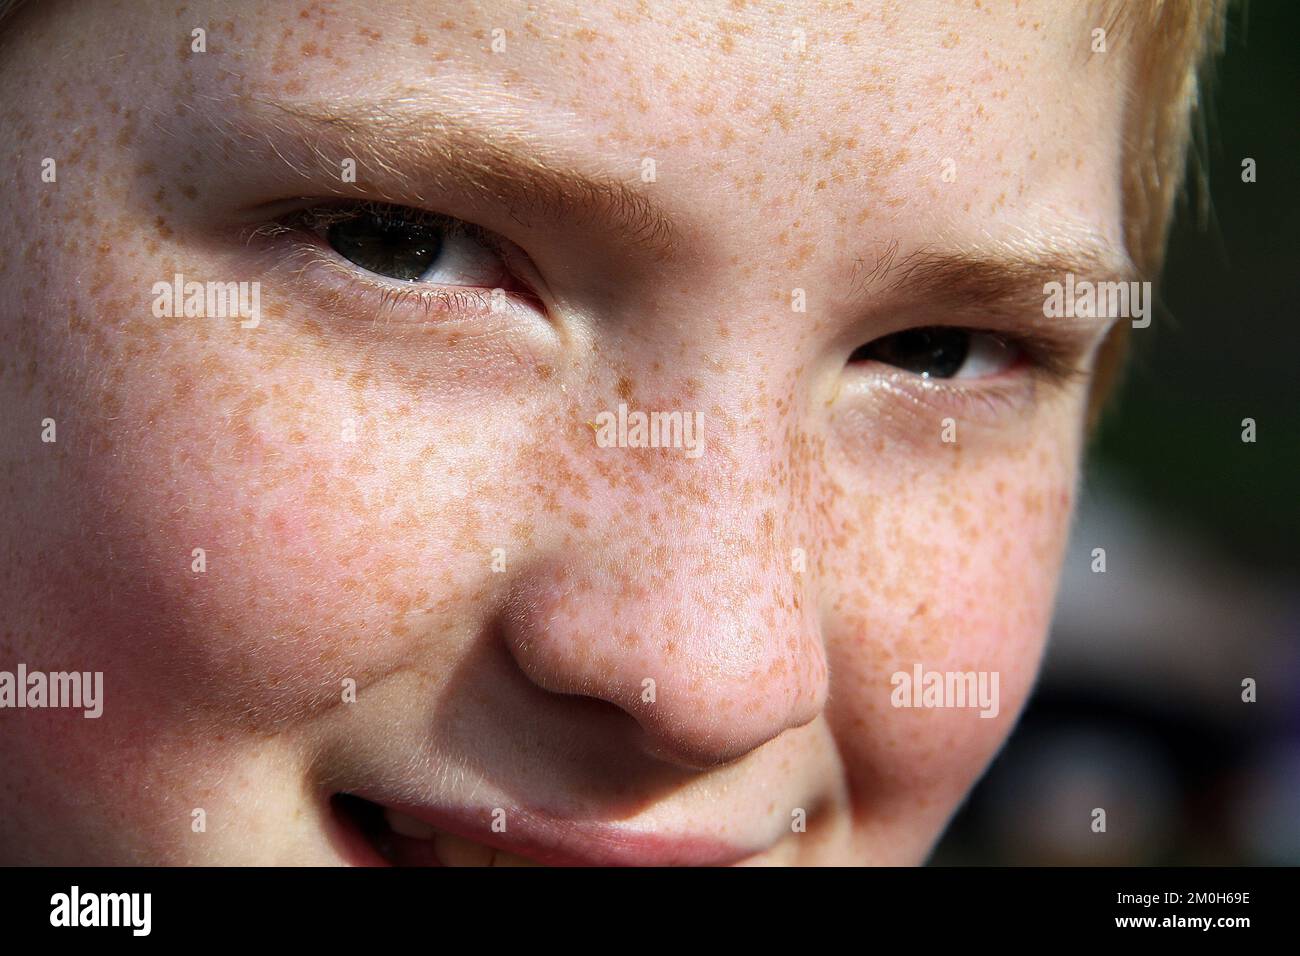 Portrait of young boy with freckles Stock Photo